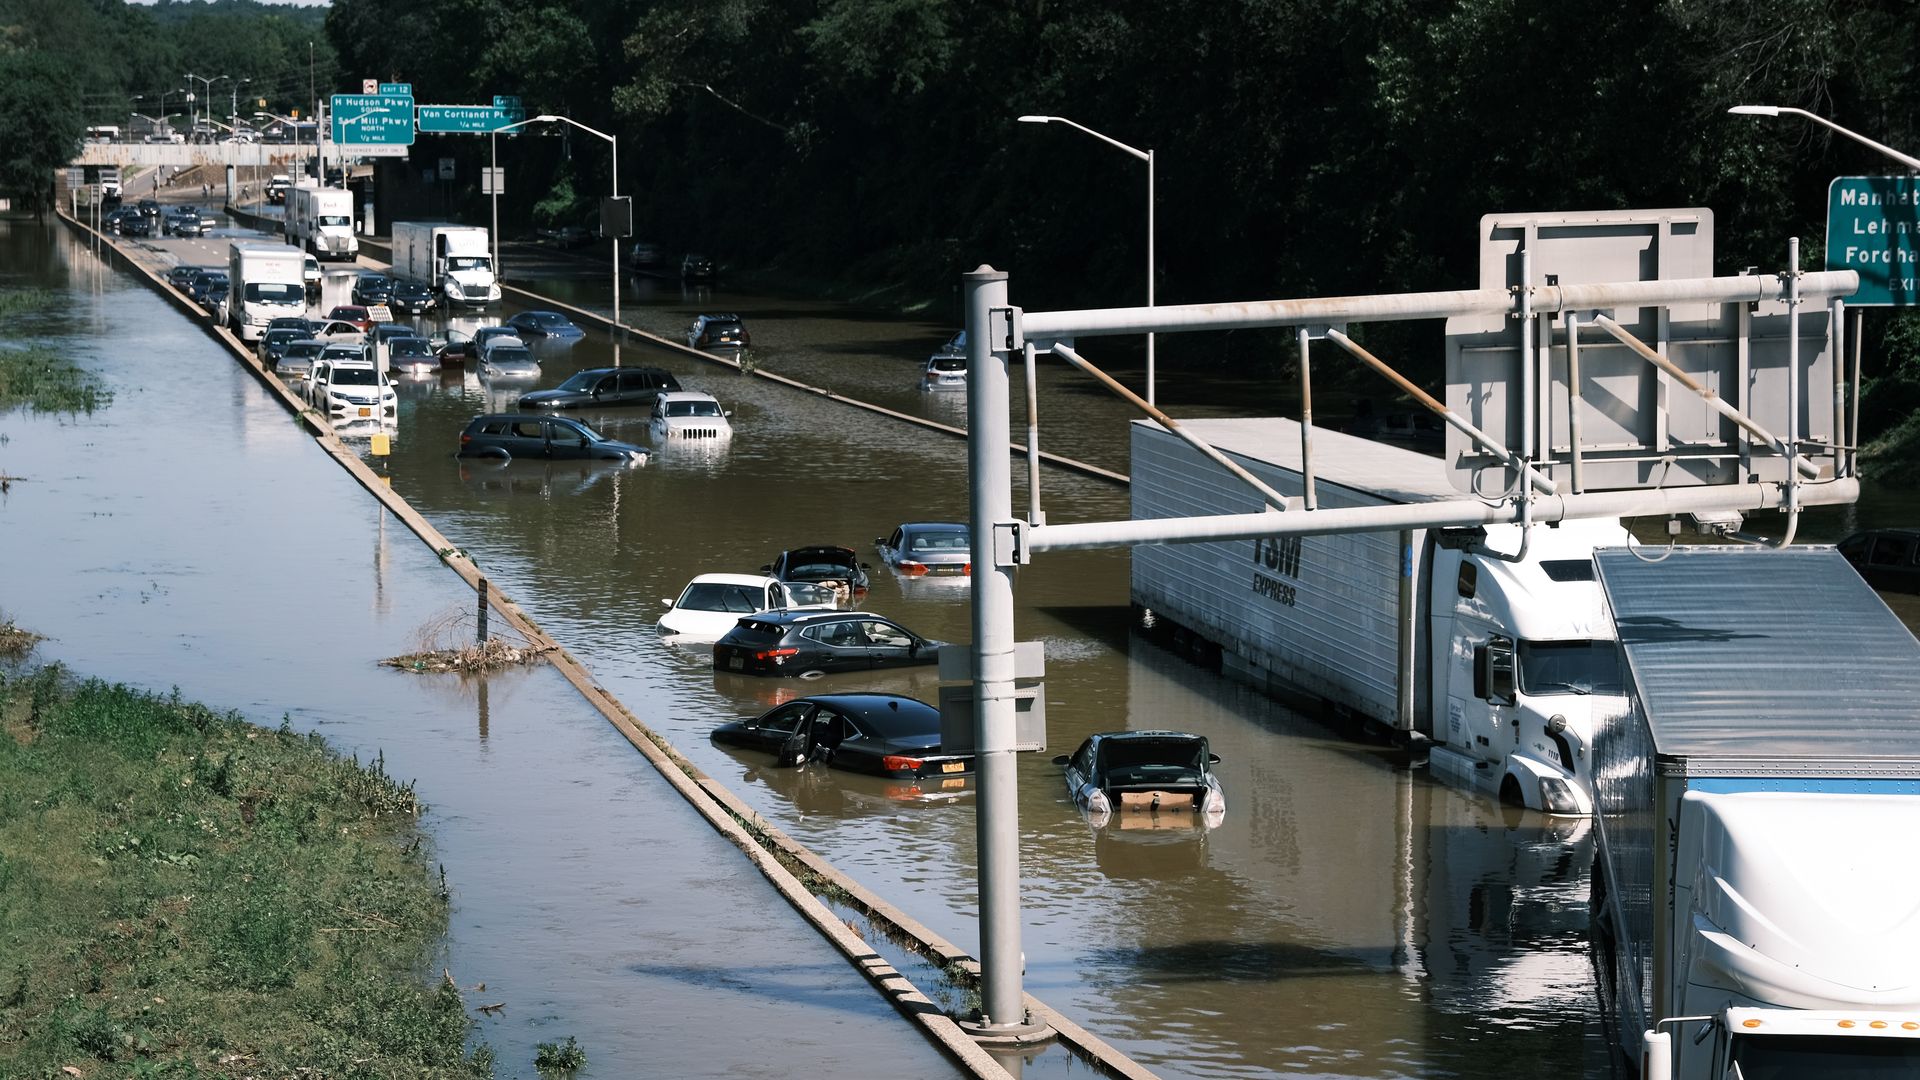 Flooded cars sit on a highway full of water after a deluge.